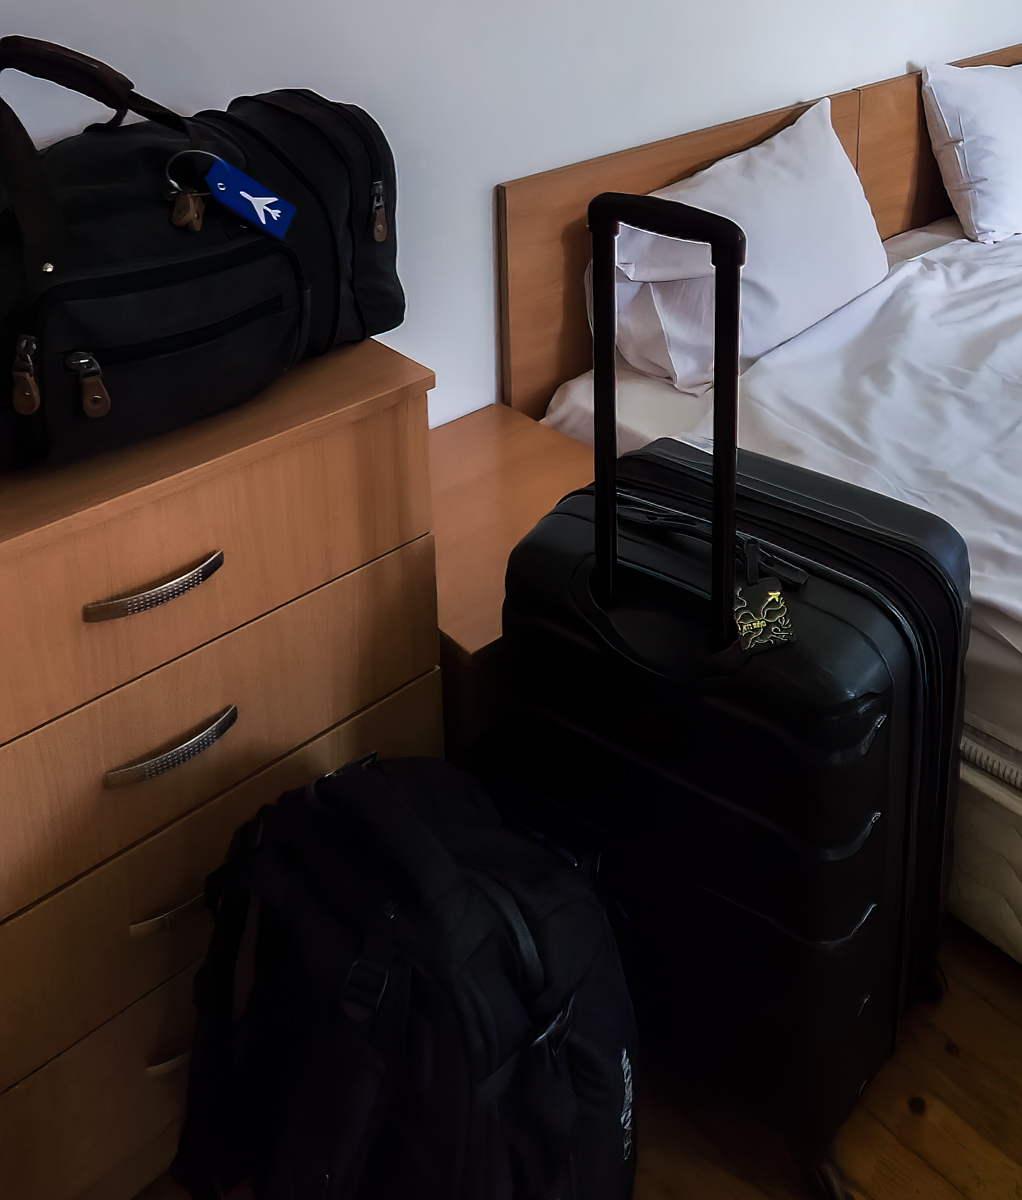 Beis Luggage Sizer Challenge: Personal item or Carry on? 